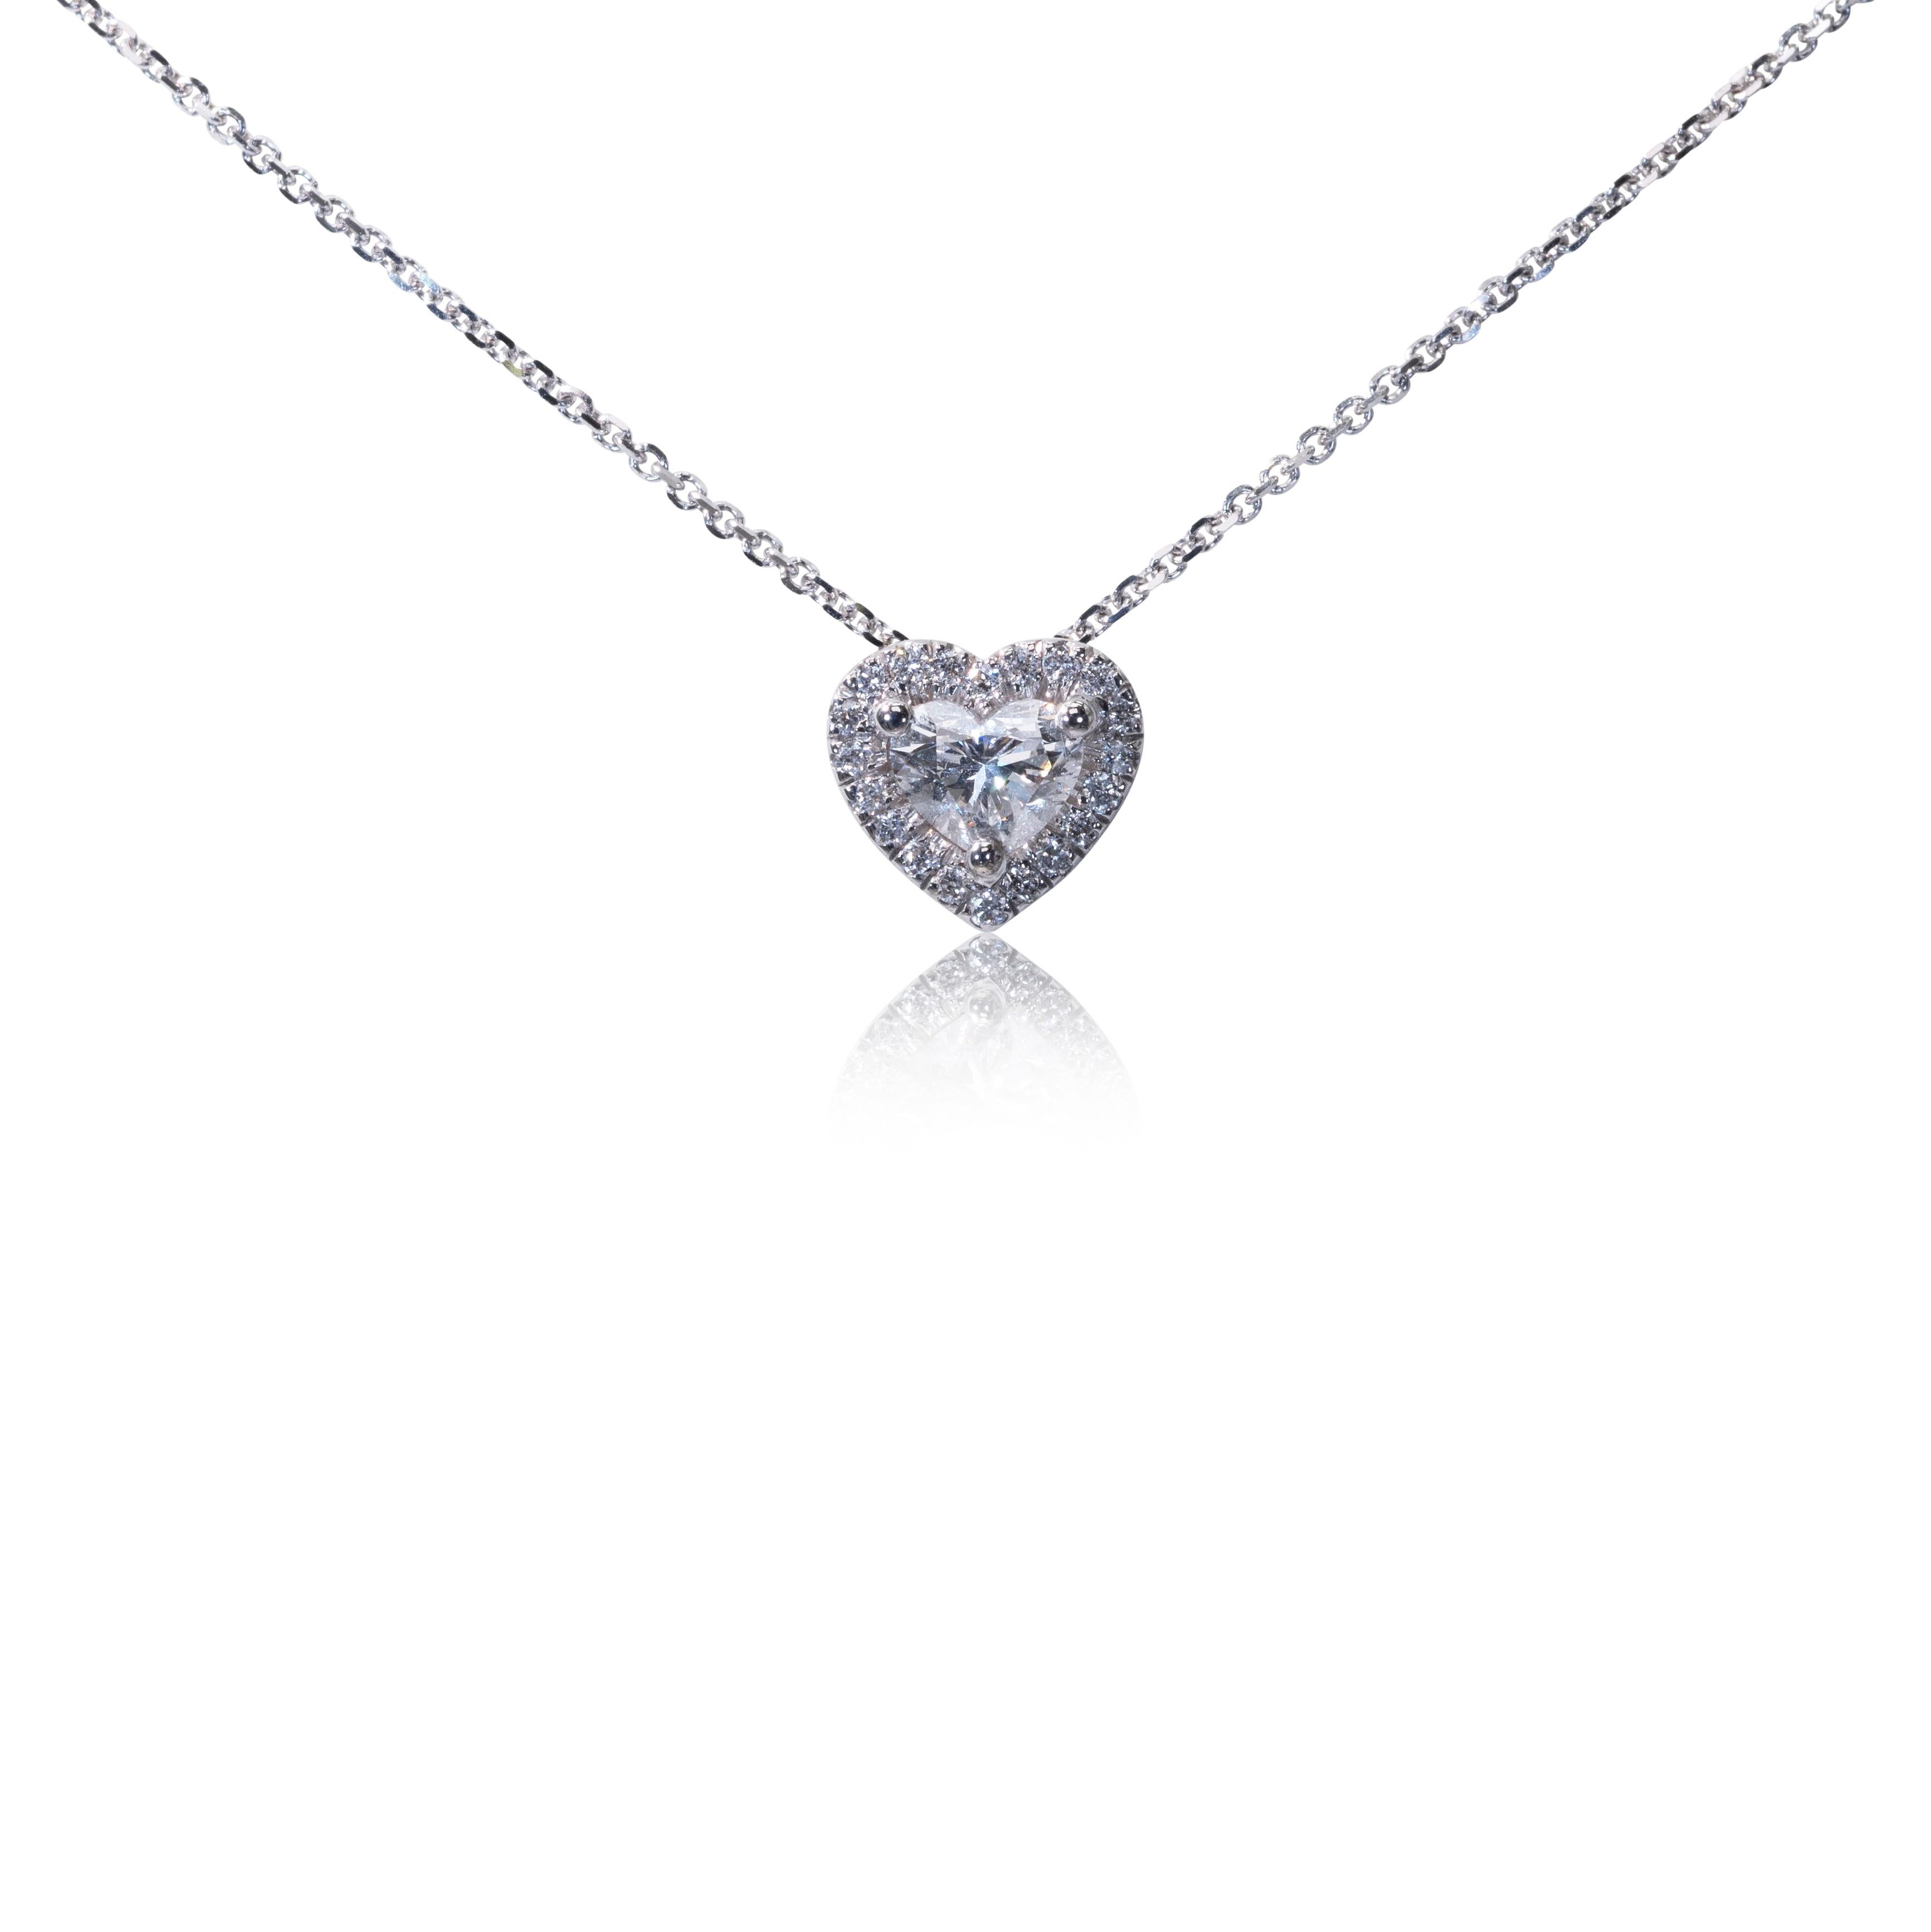 Beautiful halo diamond pendant made from 18k white gold with 0.35 total carat of heart shape diamond and round brilliant diamonds. This pendant comes with a GIA certificate and a fancy box.

-1 diamond main stone of 0.30 ct.
cut: heart
color: